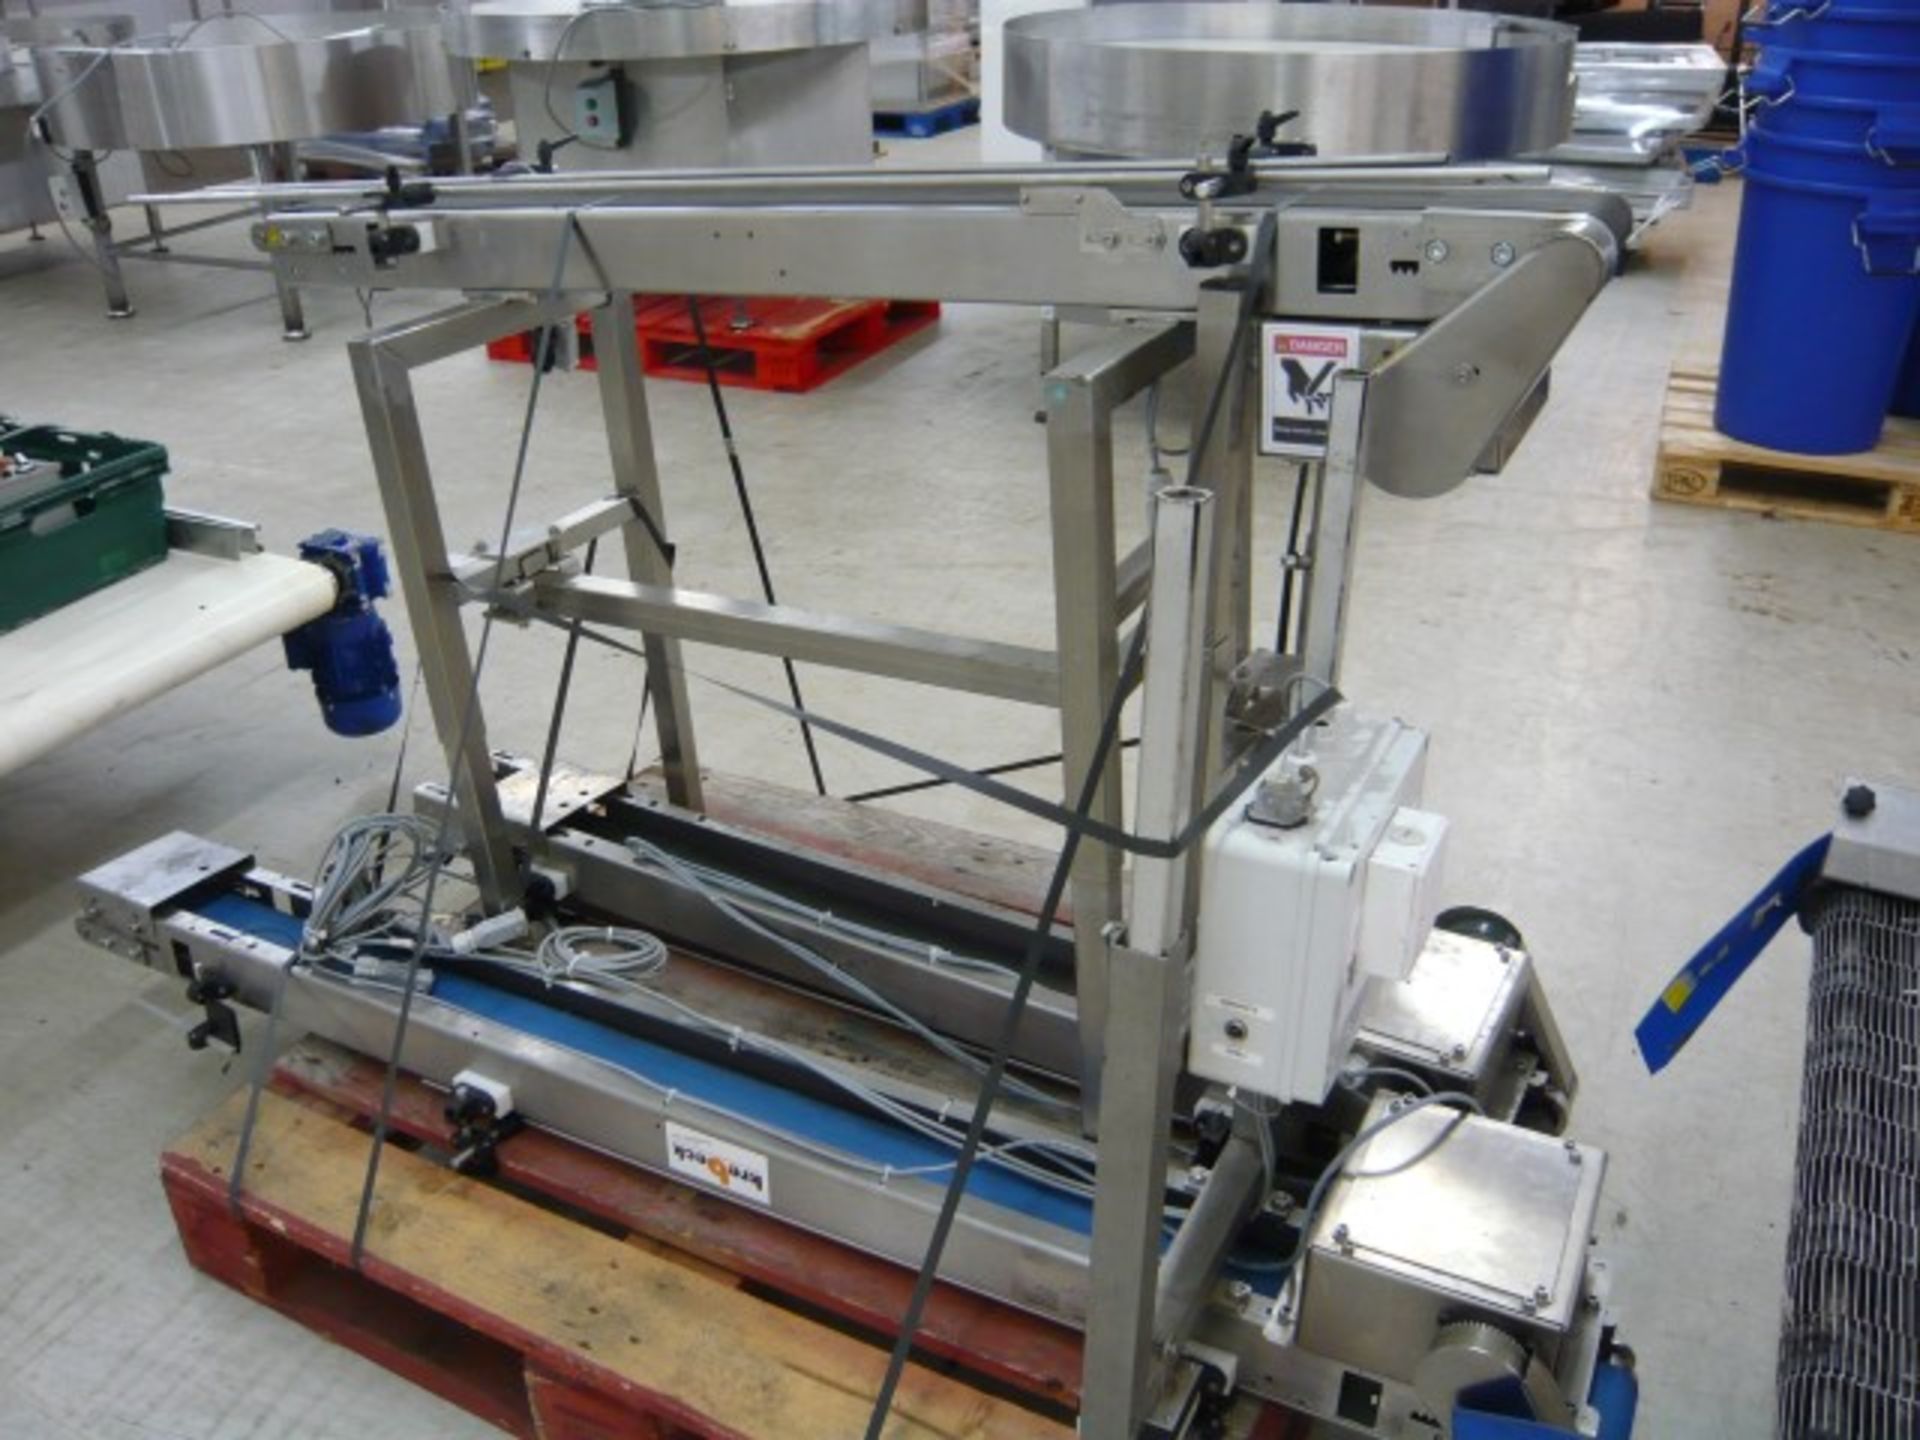 Blueberry weighing and packing line - Image 5 of 10